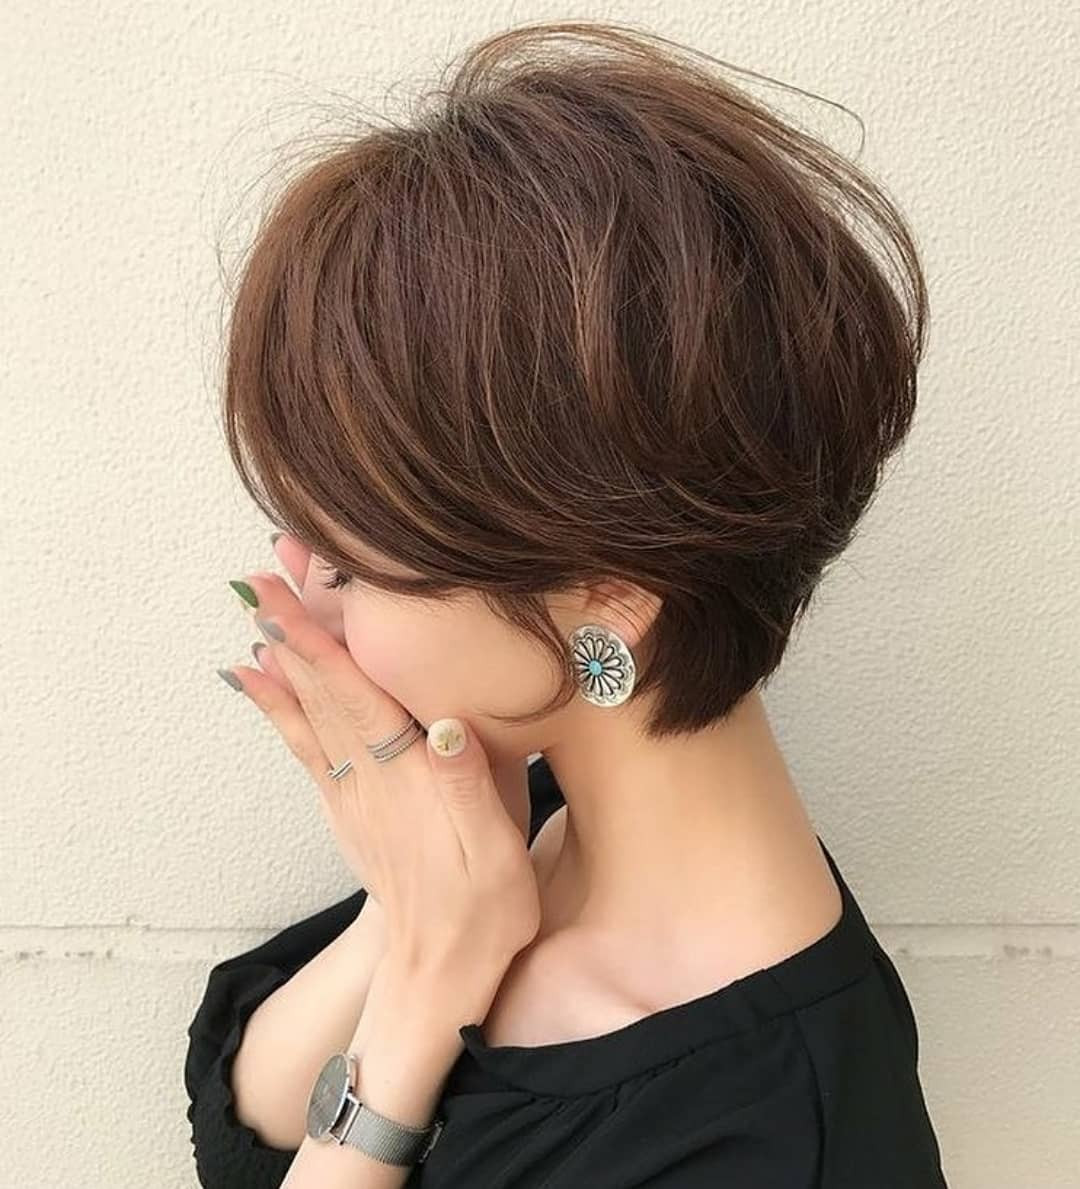 Hairstyles For Younger Girls
 10 Cute Short Hairstyles and Haircuts for Young Girls